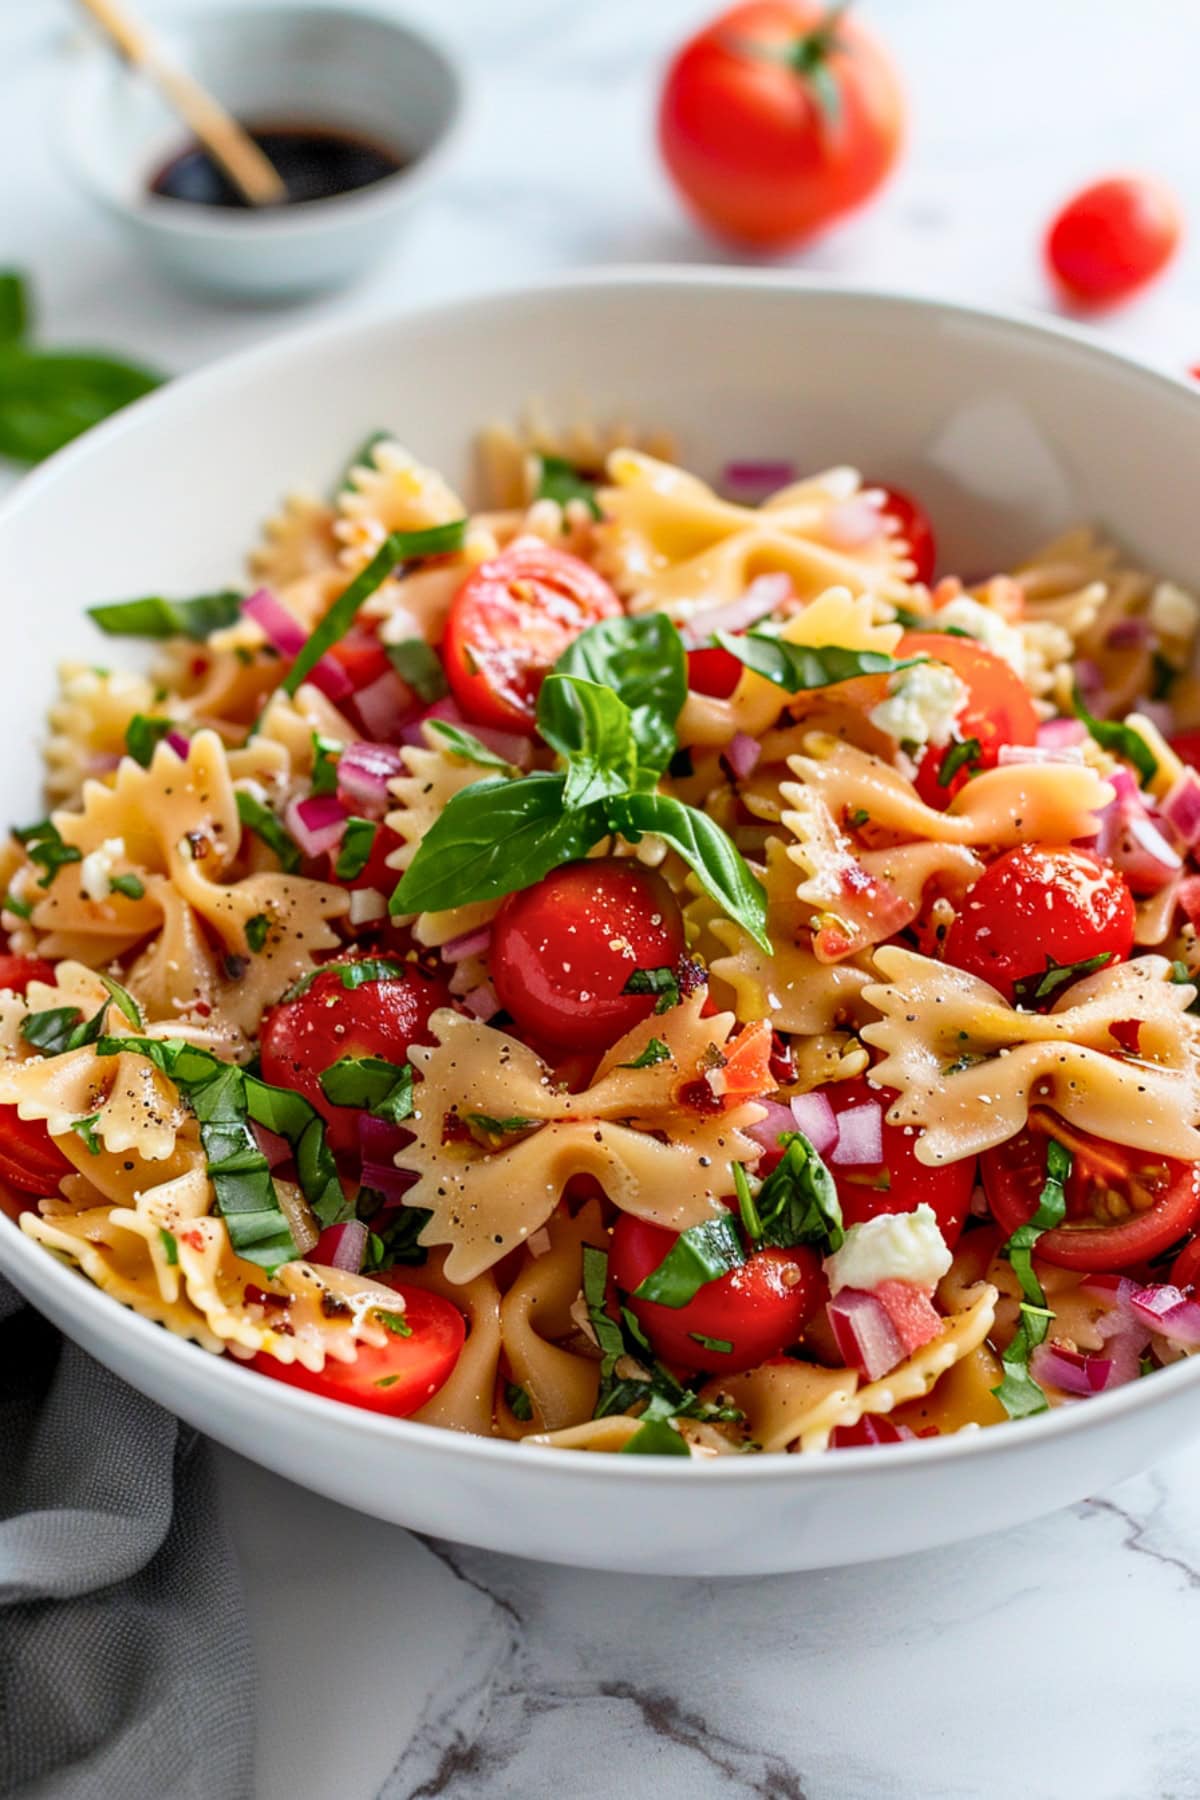 Bruschetta pasta salad made with made with cherry tomatoes, fragrant basil, tangy balsamic vinegar, and creamy mozzarella pearls and bowties pasta served in a white bowl.